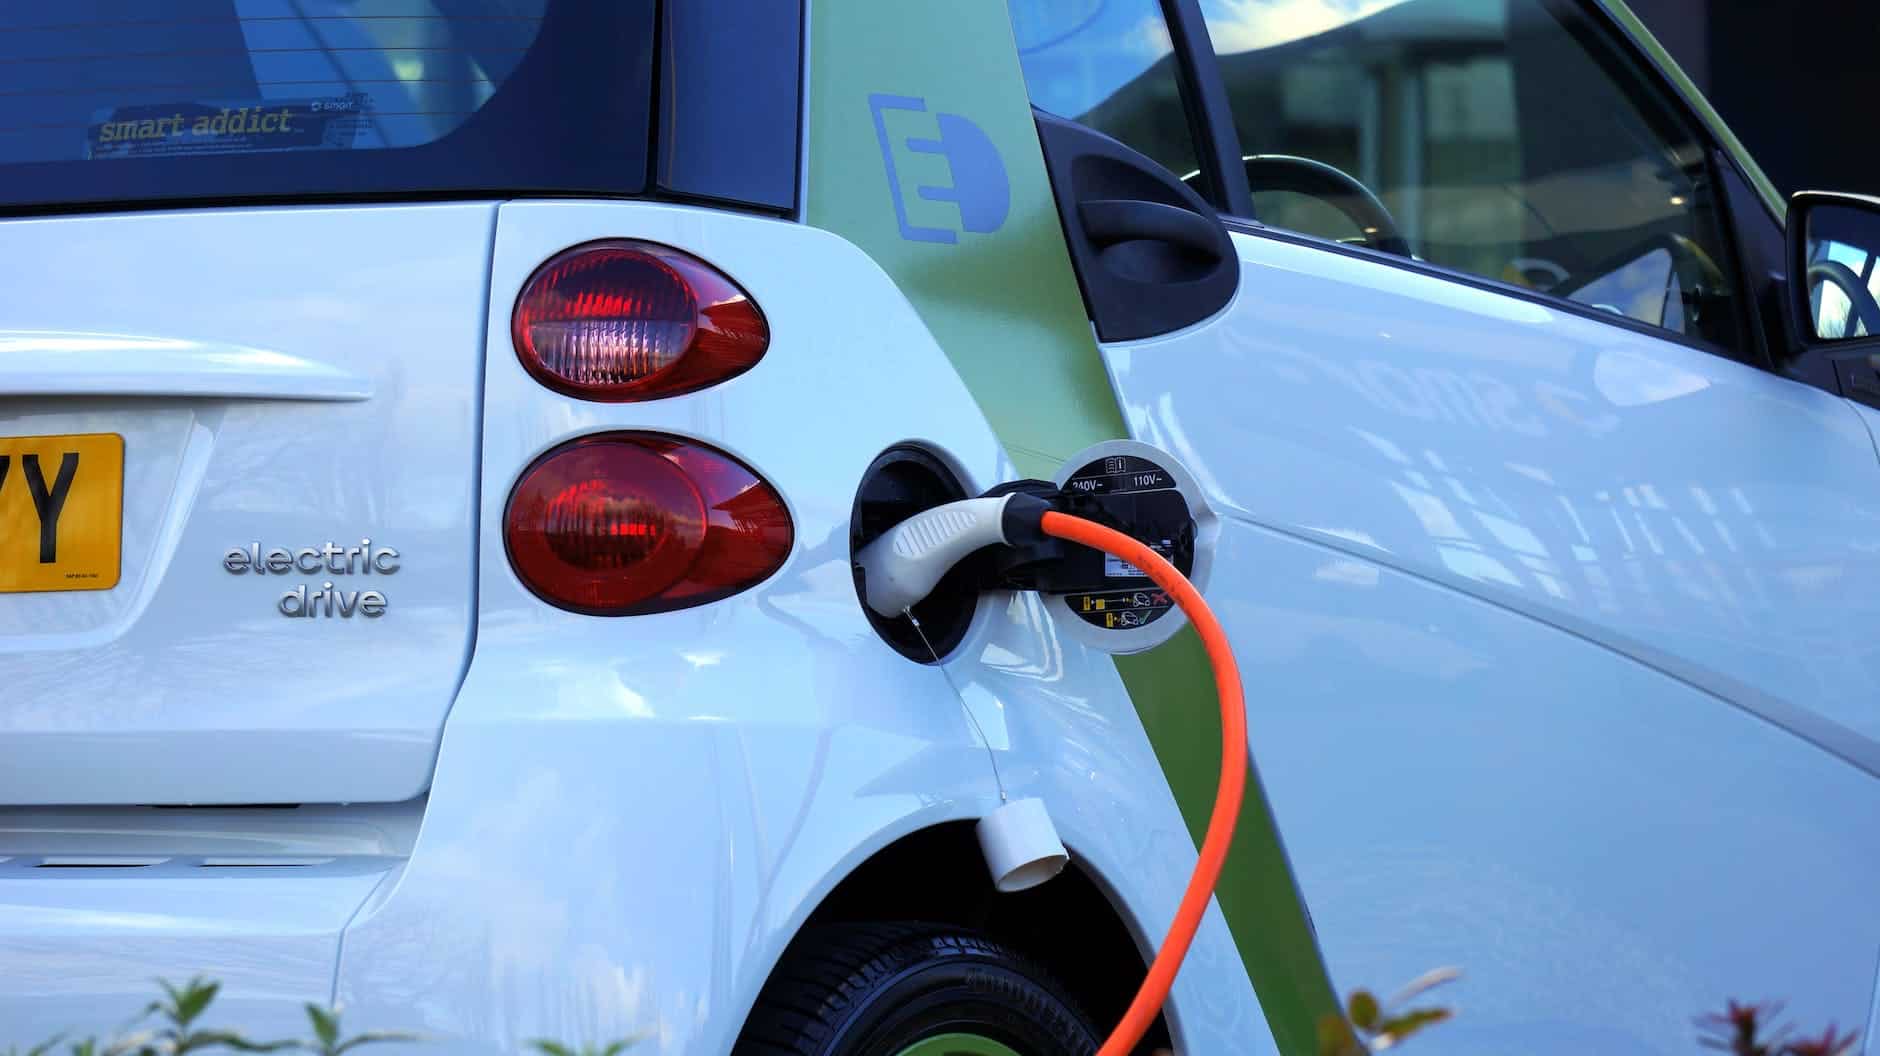 Switzerland to restrict use of electric vehicles